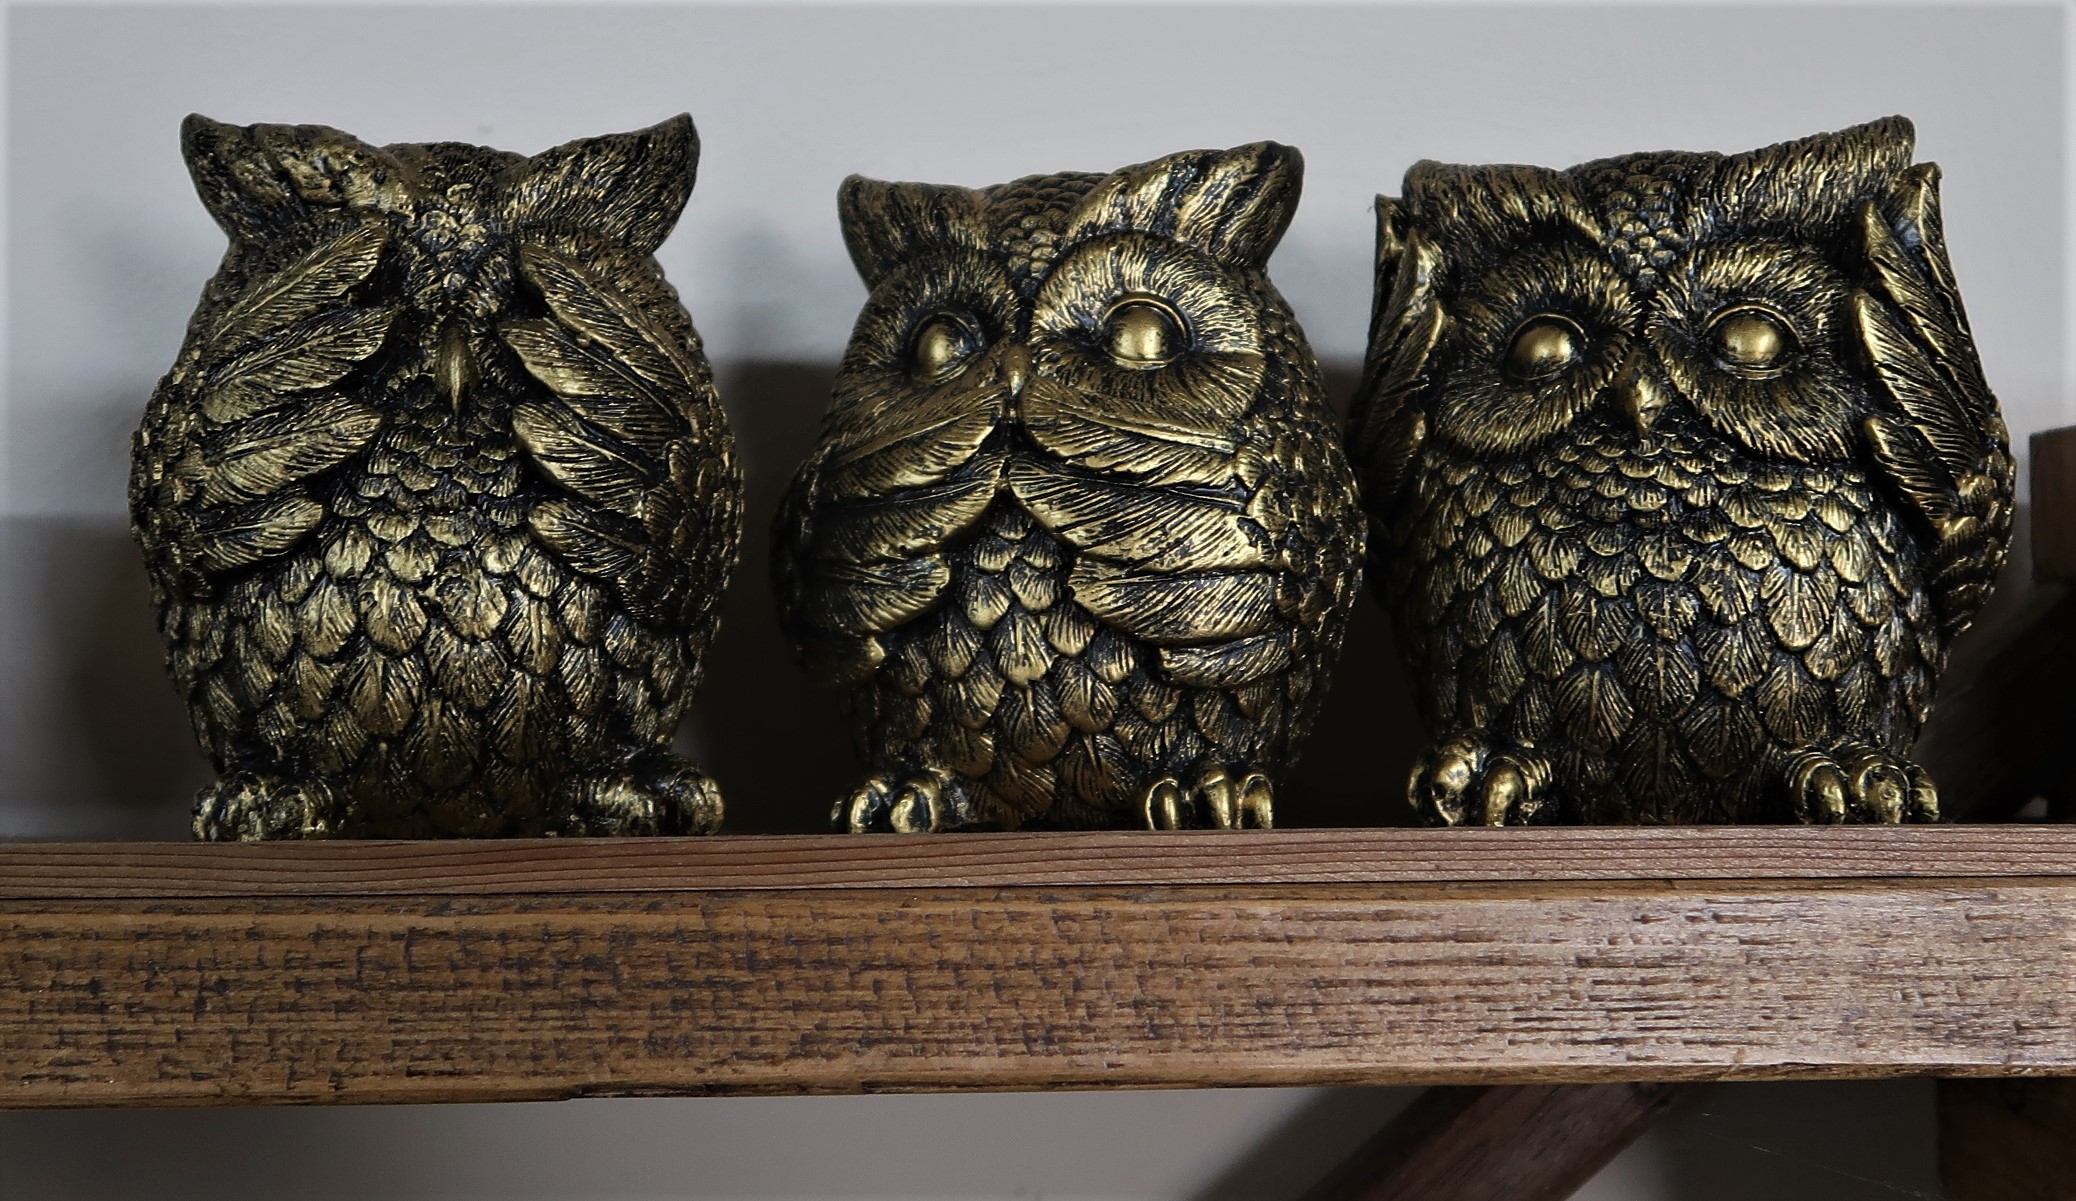 Three wise gold owls